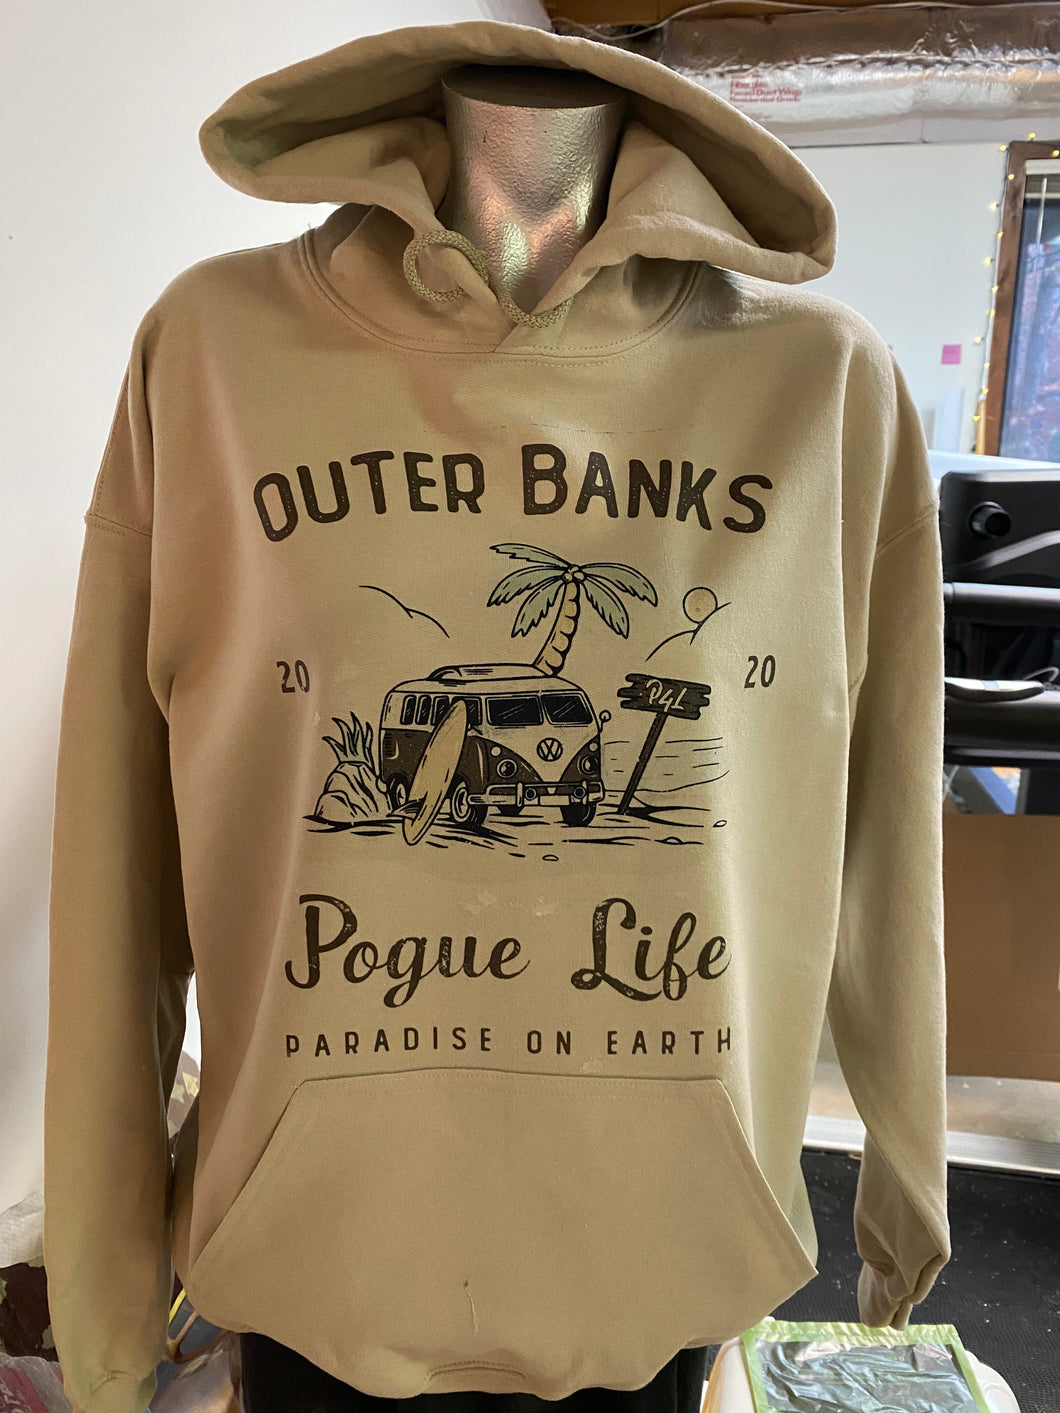 My Vinyl Cut brand T Shirt or Hoodie Pogue Life Outer Banks Surfer Shirt or Hoodie